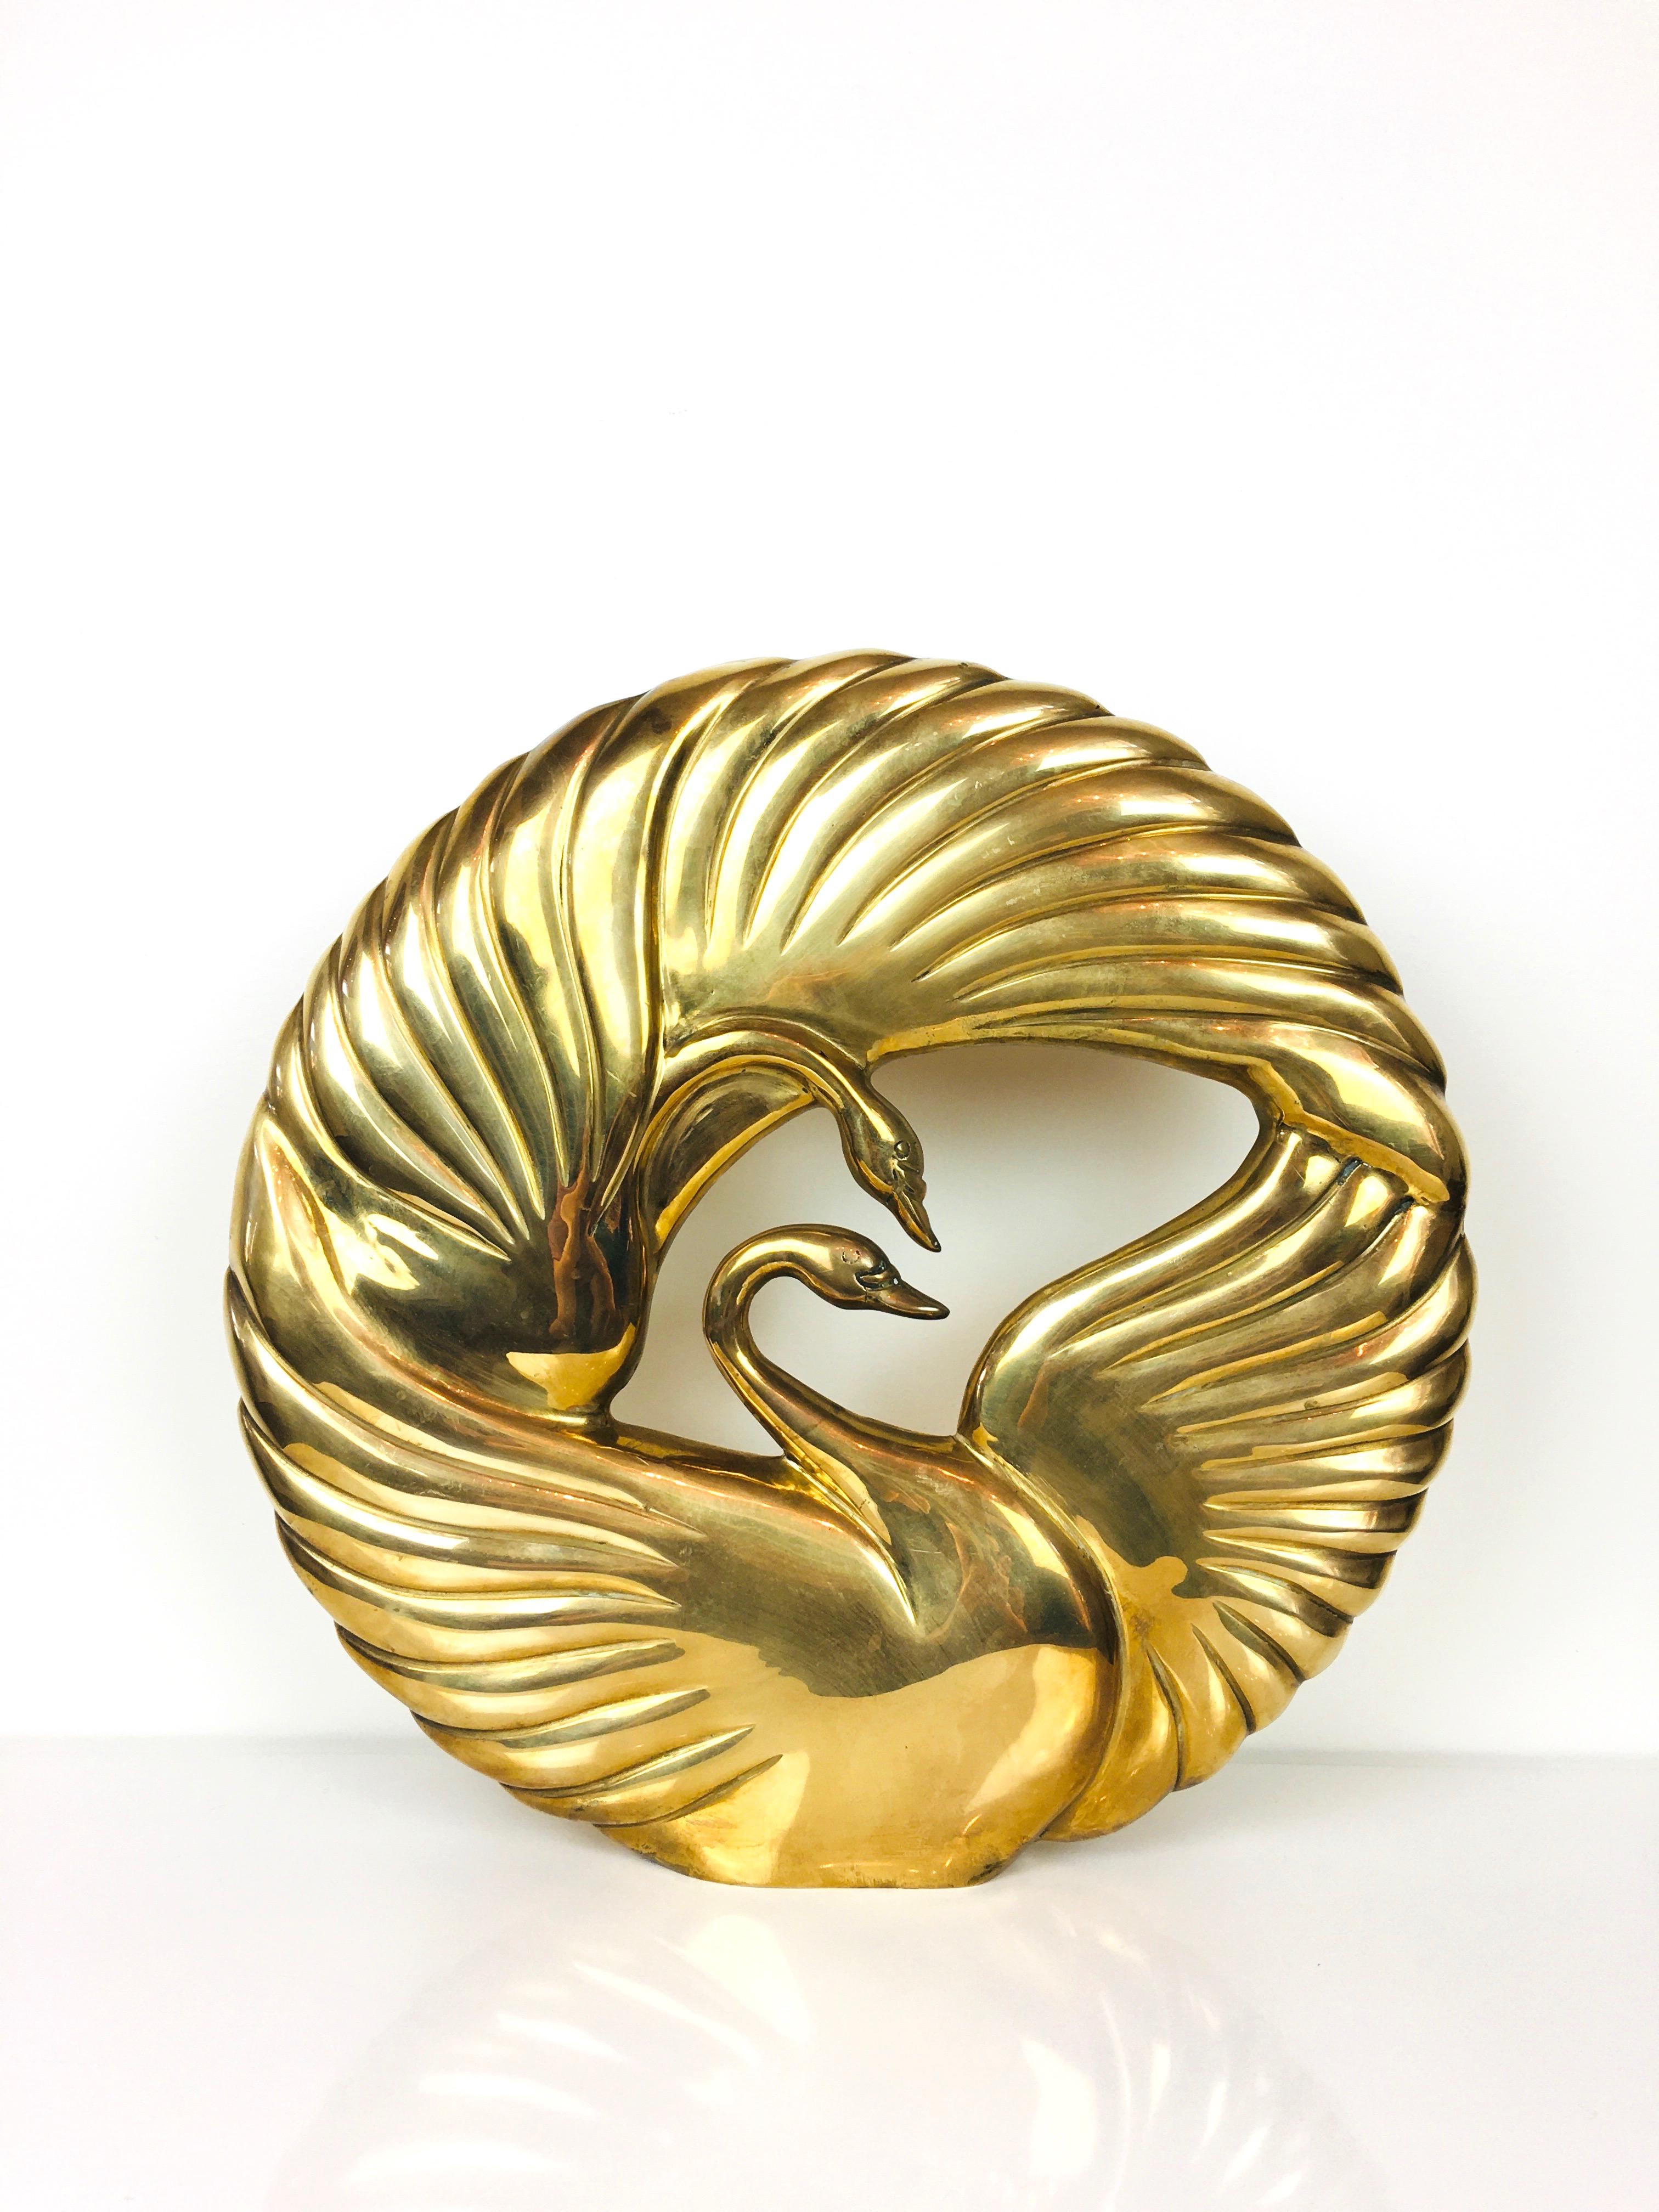 Striking 1980s brass Art Deco style double swan table sculpture by Dolbi Cashier.
Round shape & double sided. 
Nice warm glow, polished. 
Labels at base. 
Very good condition, light surface wear.